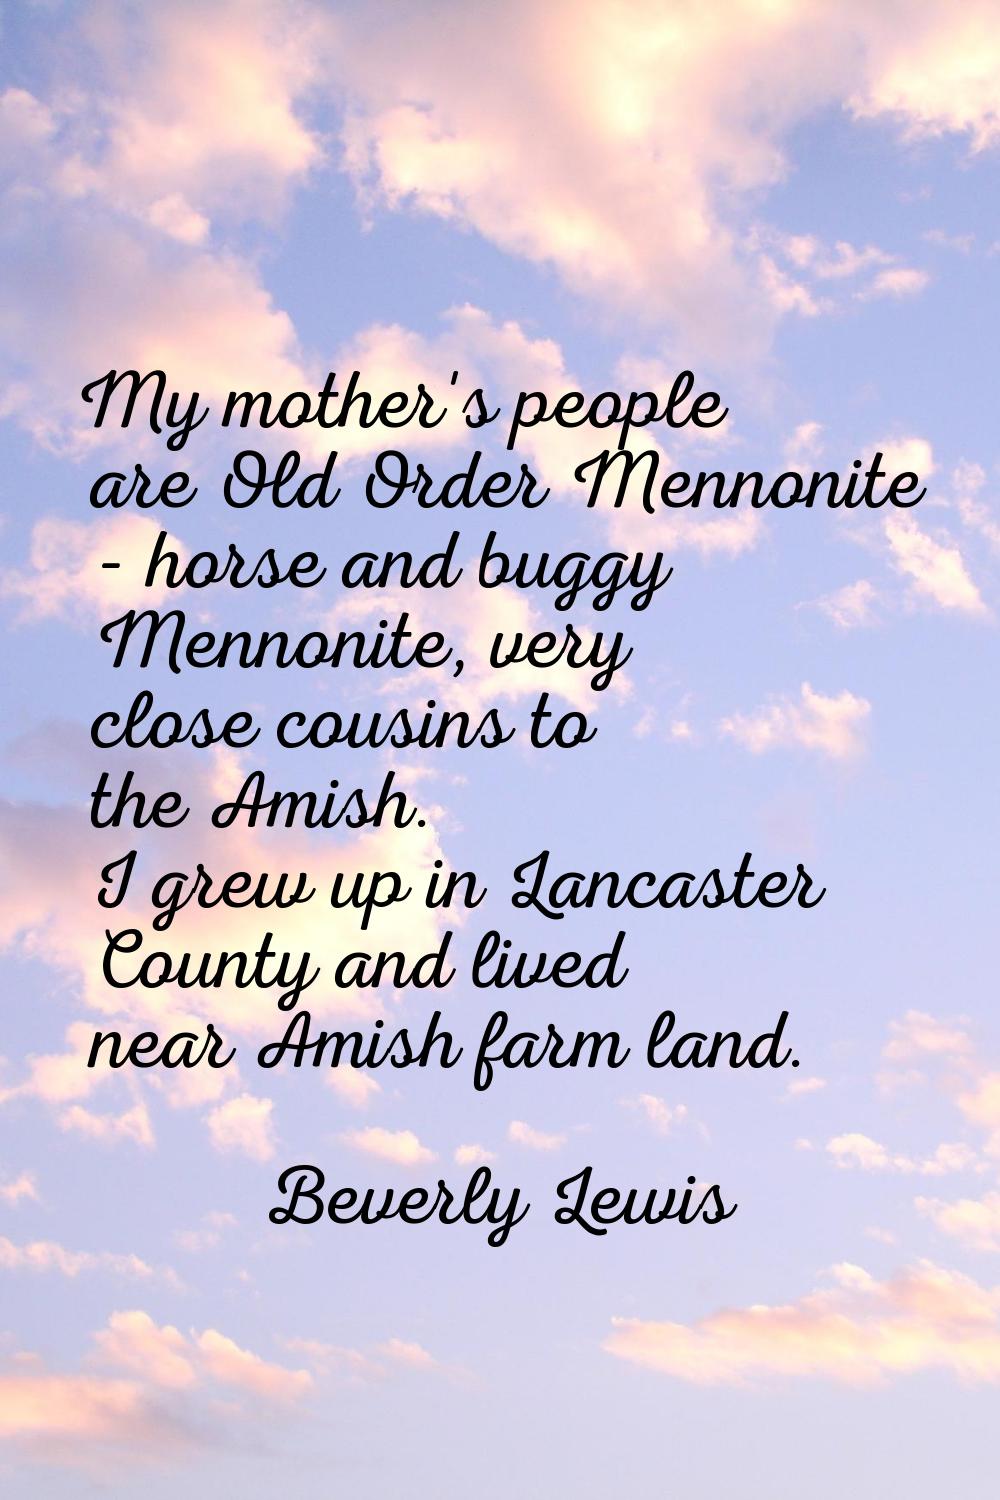 My mother's people are Old Order Mennonite - horse and buggy Mennonite, very close cousins to the A